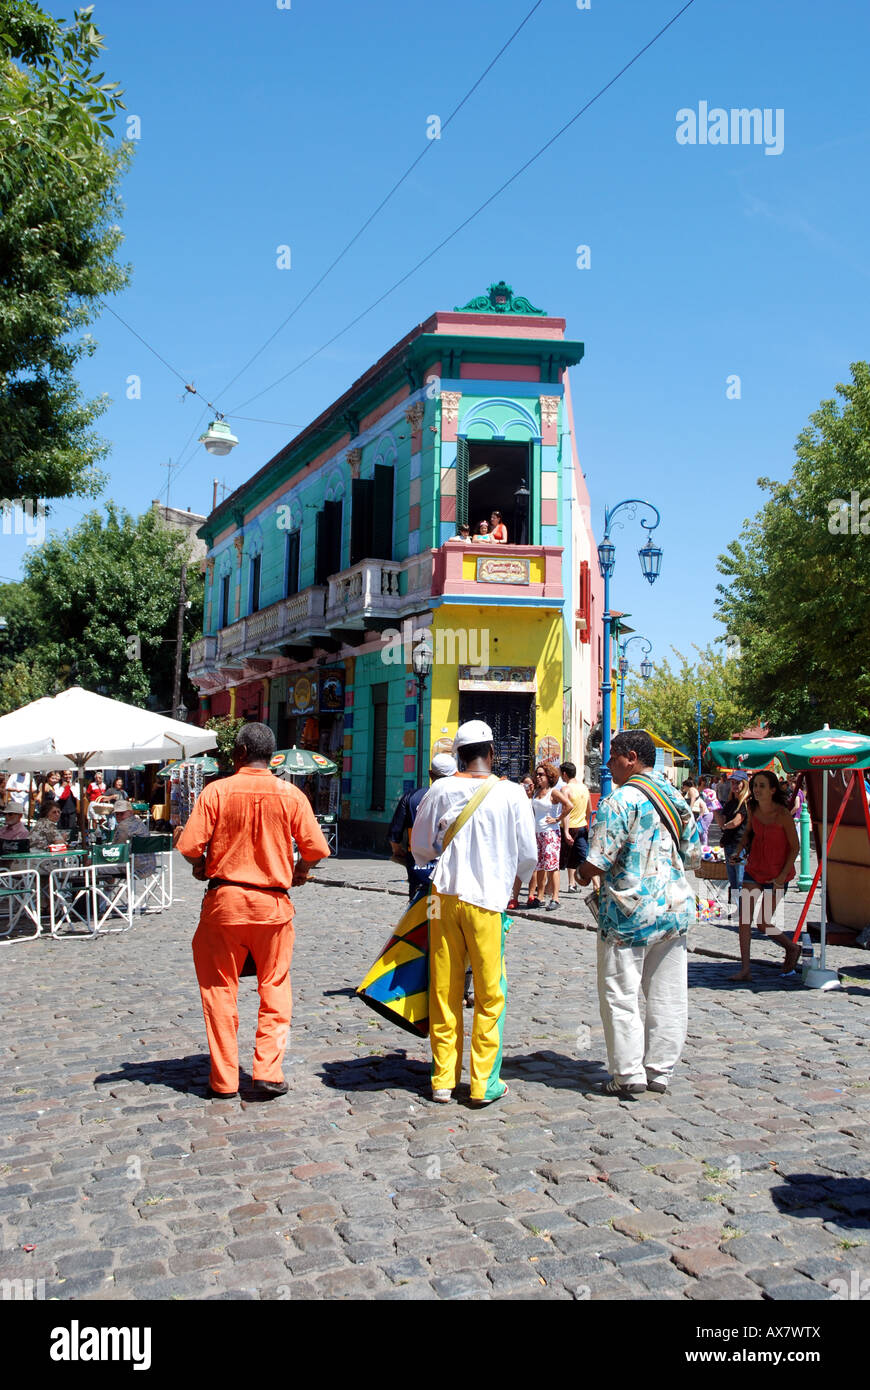 Street performers in the neighborhood of La Boca in Buenos Aires, Argentina. Stock Photo